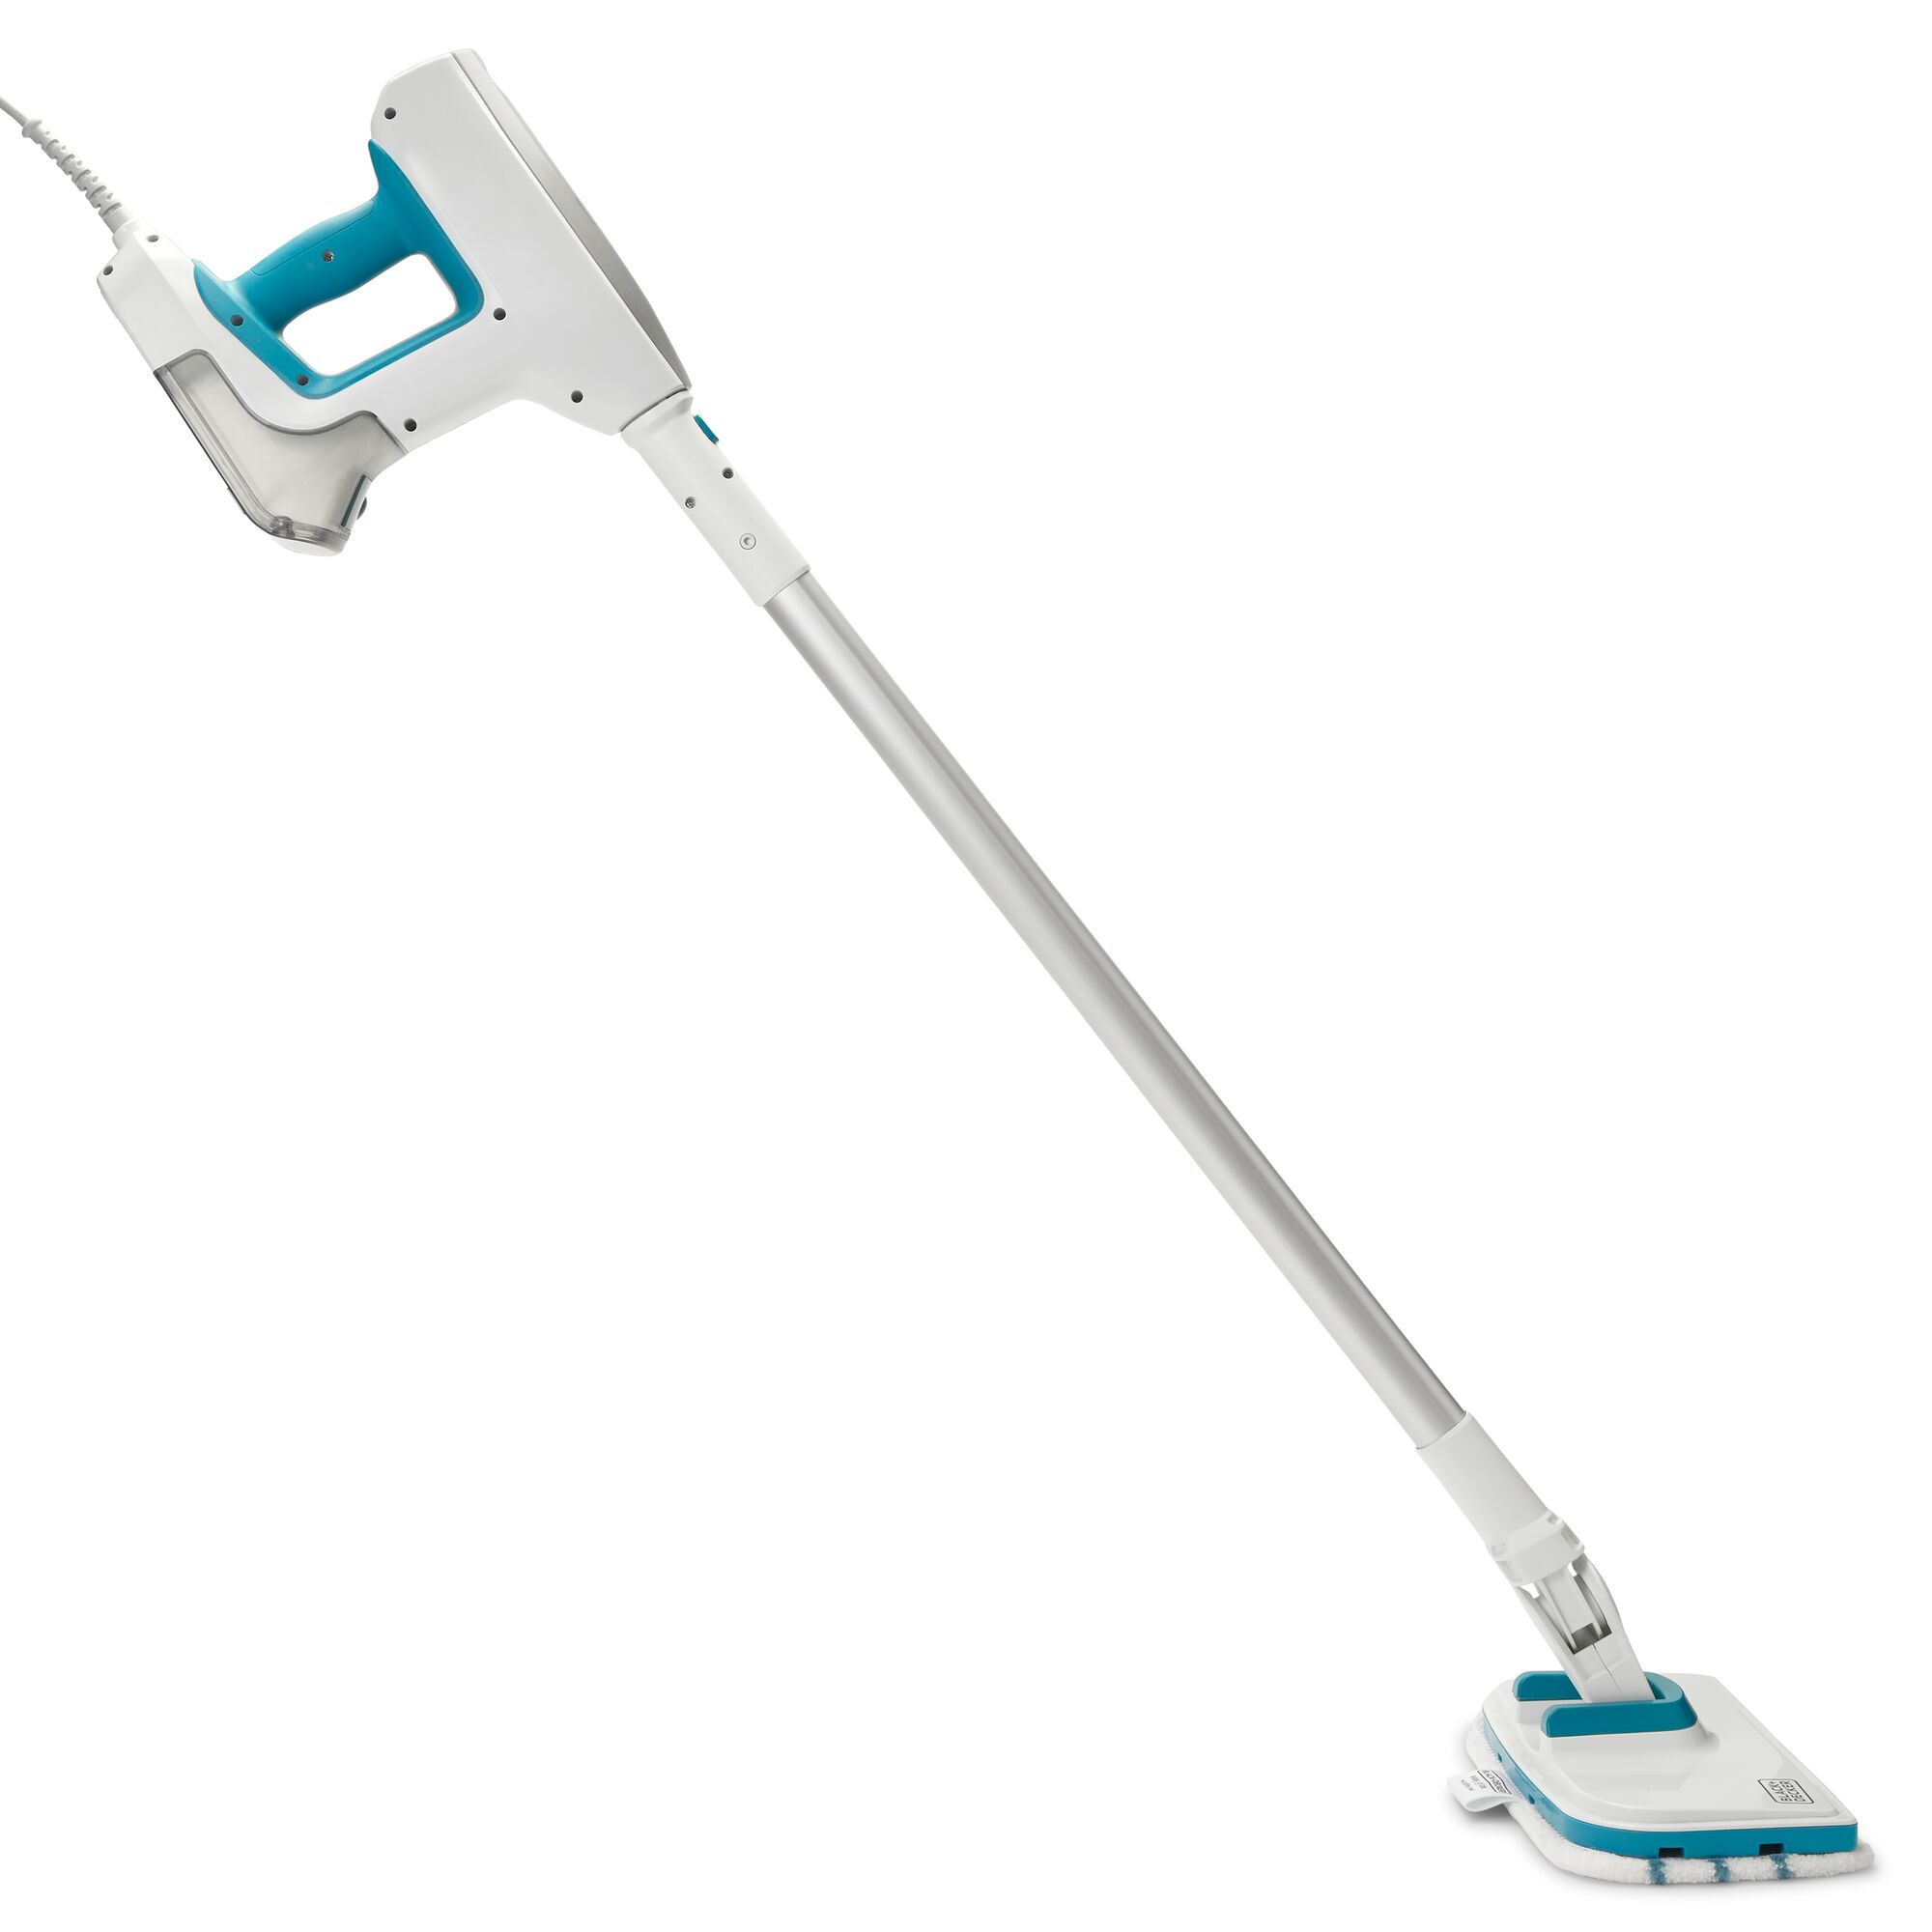 Hero picture of BLACK+DECKER steam mop with mop head pointed to the right